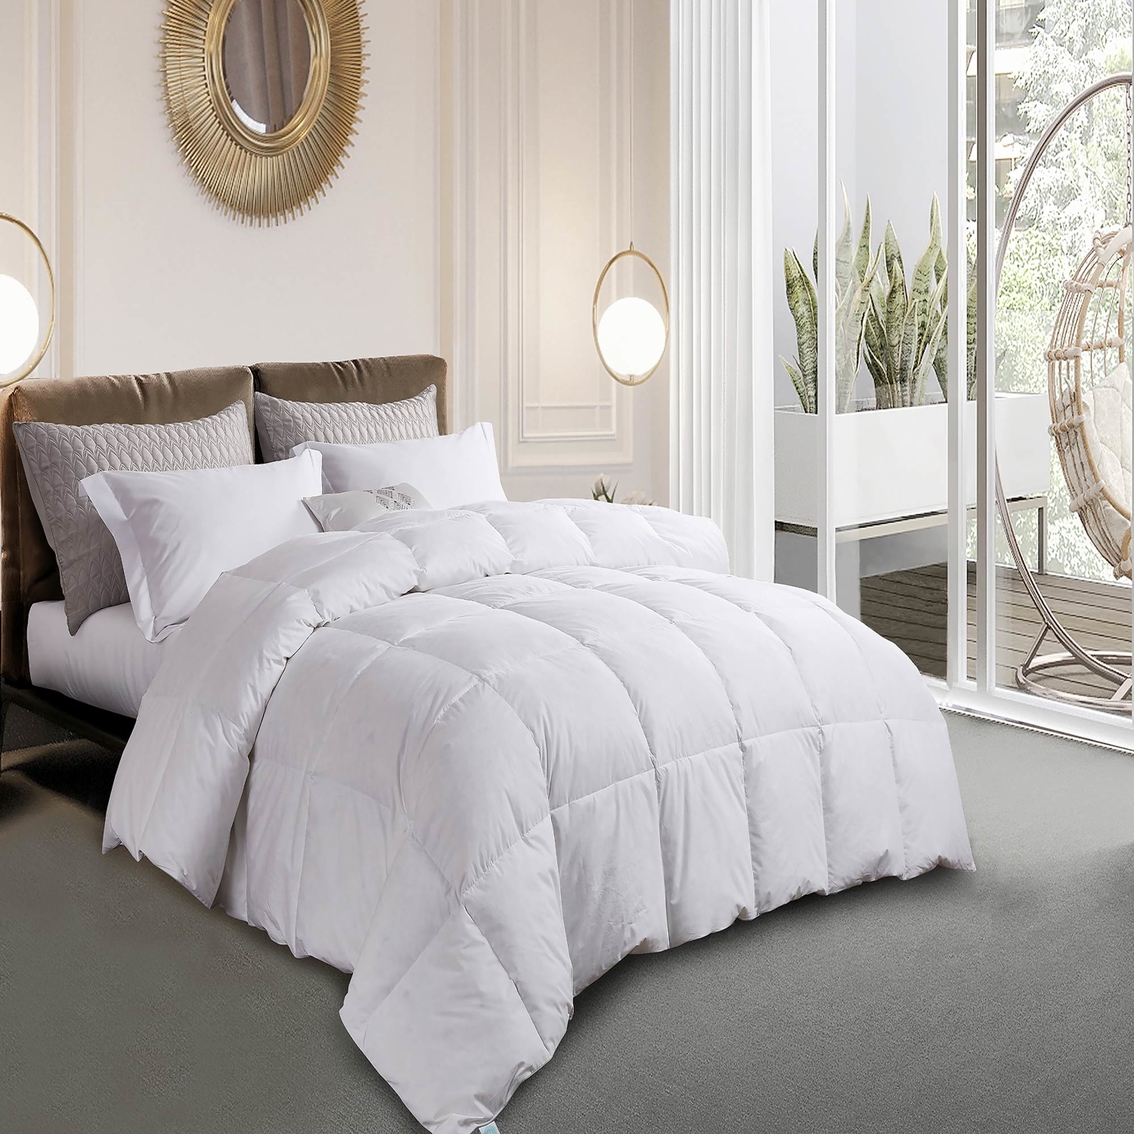 Martha Stewart Collection White Goose Feather and Down Comforter - Image 4 of 4